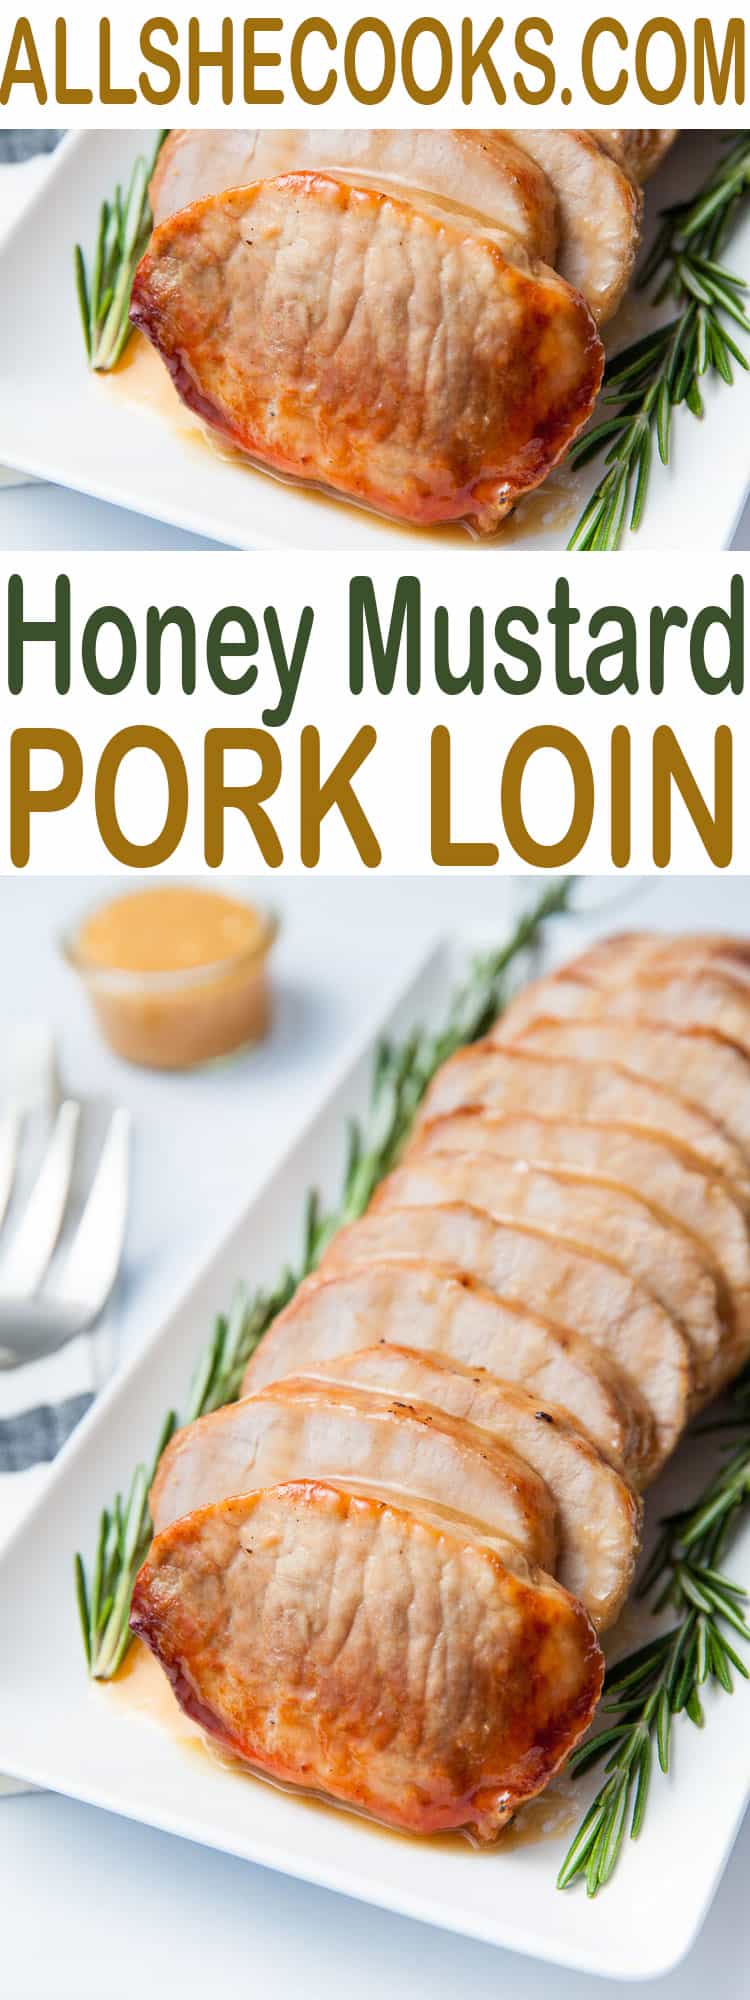 Honey Mustard Pork Loin is a delicious meat to serve for a family dinner. It also makes an amazing holiday meat dish for a smaller gathering.